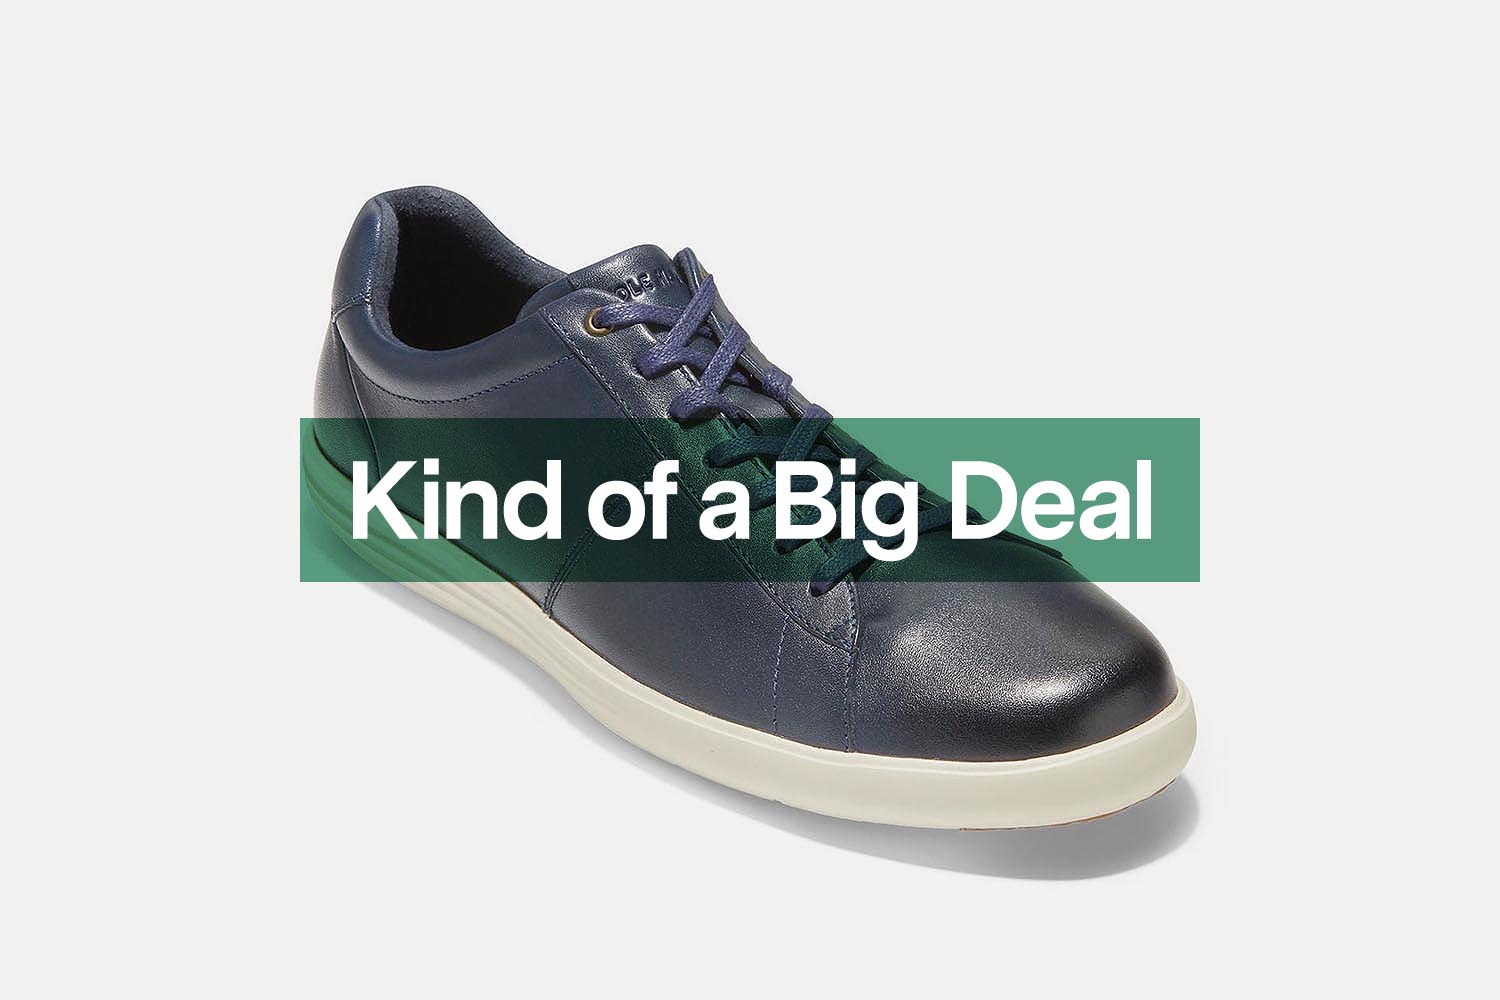 The Reagan Sneaker at Cole Haan is down to $80 at Nordstrom Rack